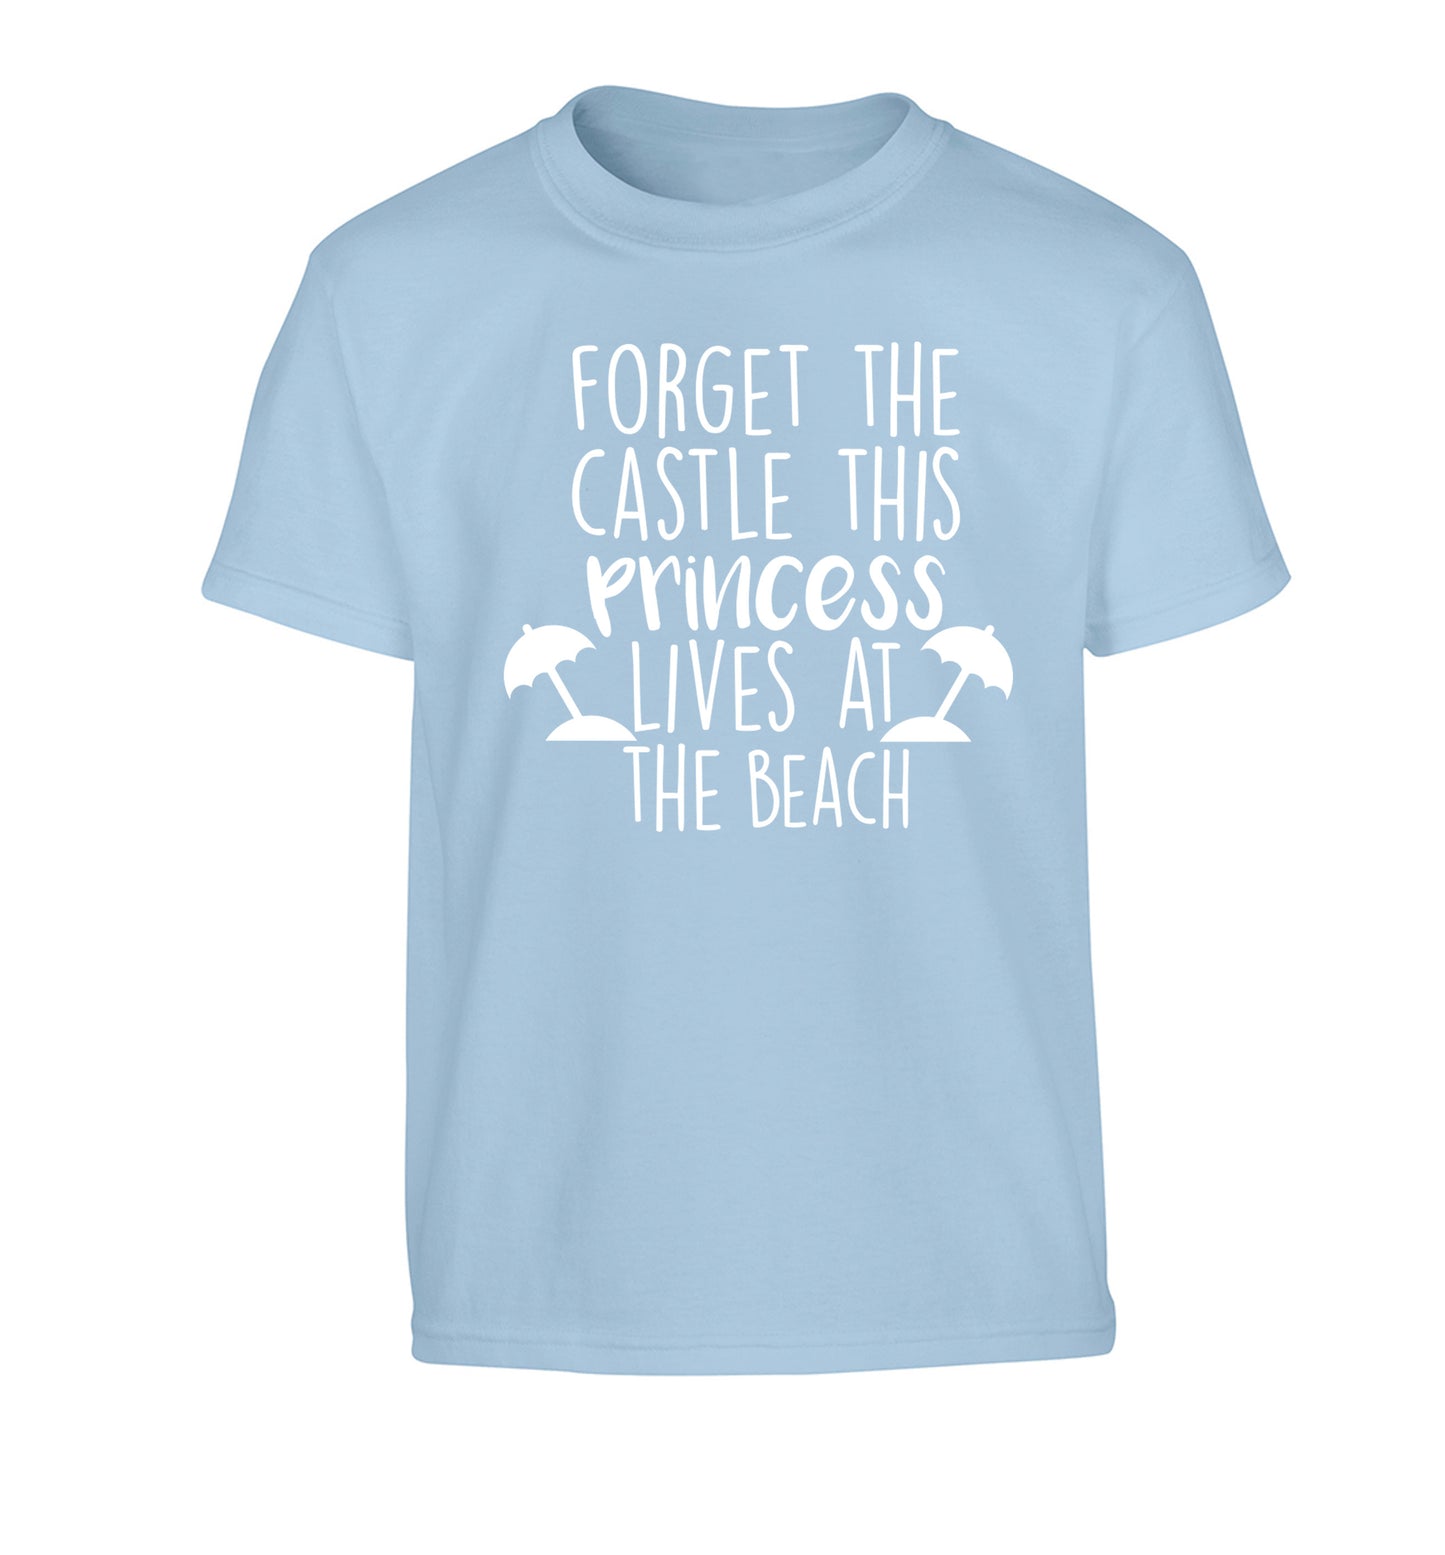 Forget the castle this princess lives at the beach Children's light blue Tshirt 12-14 Years